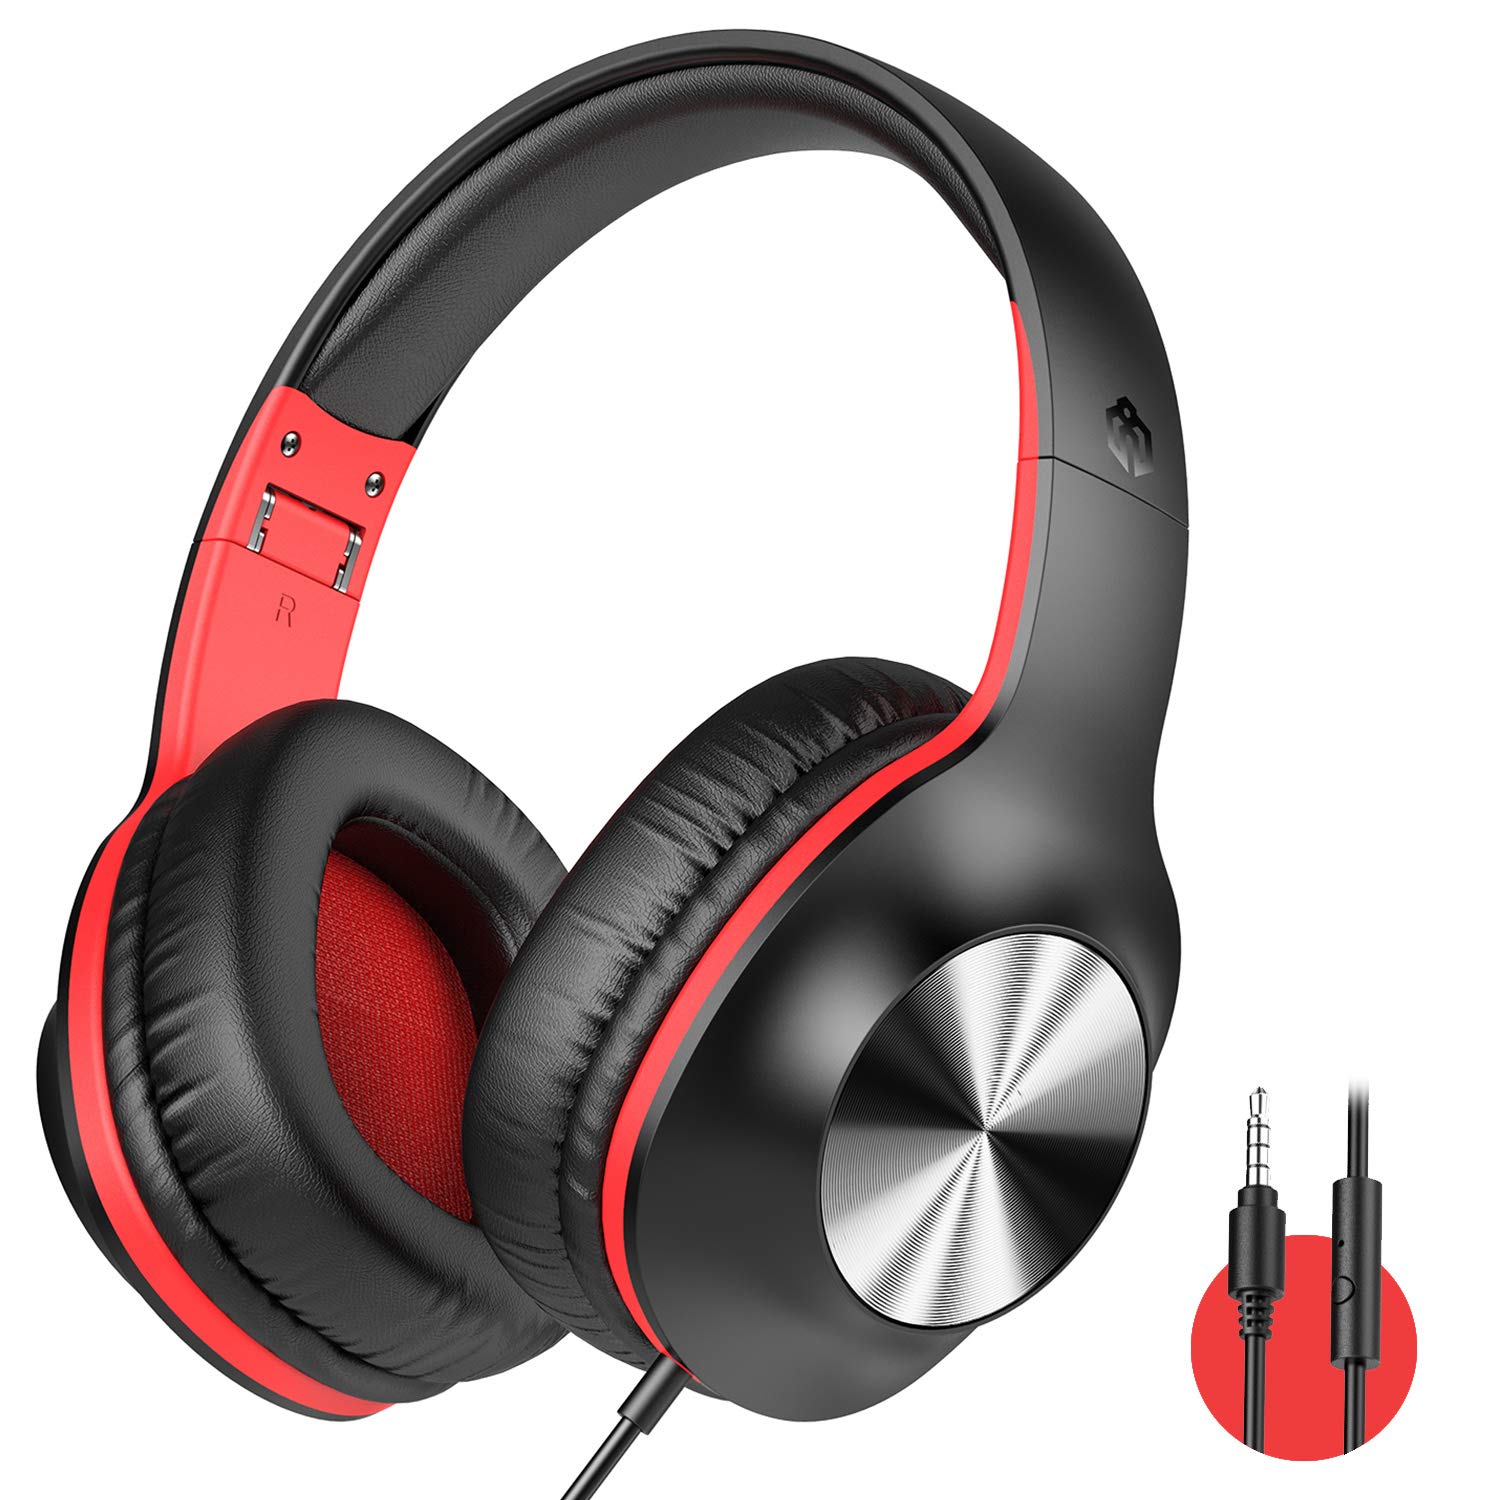 iClever HS18 Over Ear Headphones with Microphone - Foldable Lightweight Stereo Headphones, Adjustable Wired Headphones with 3.5mm Jack for Online Class/Meeting/iPad/Smartphone/Computer, Black&Red